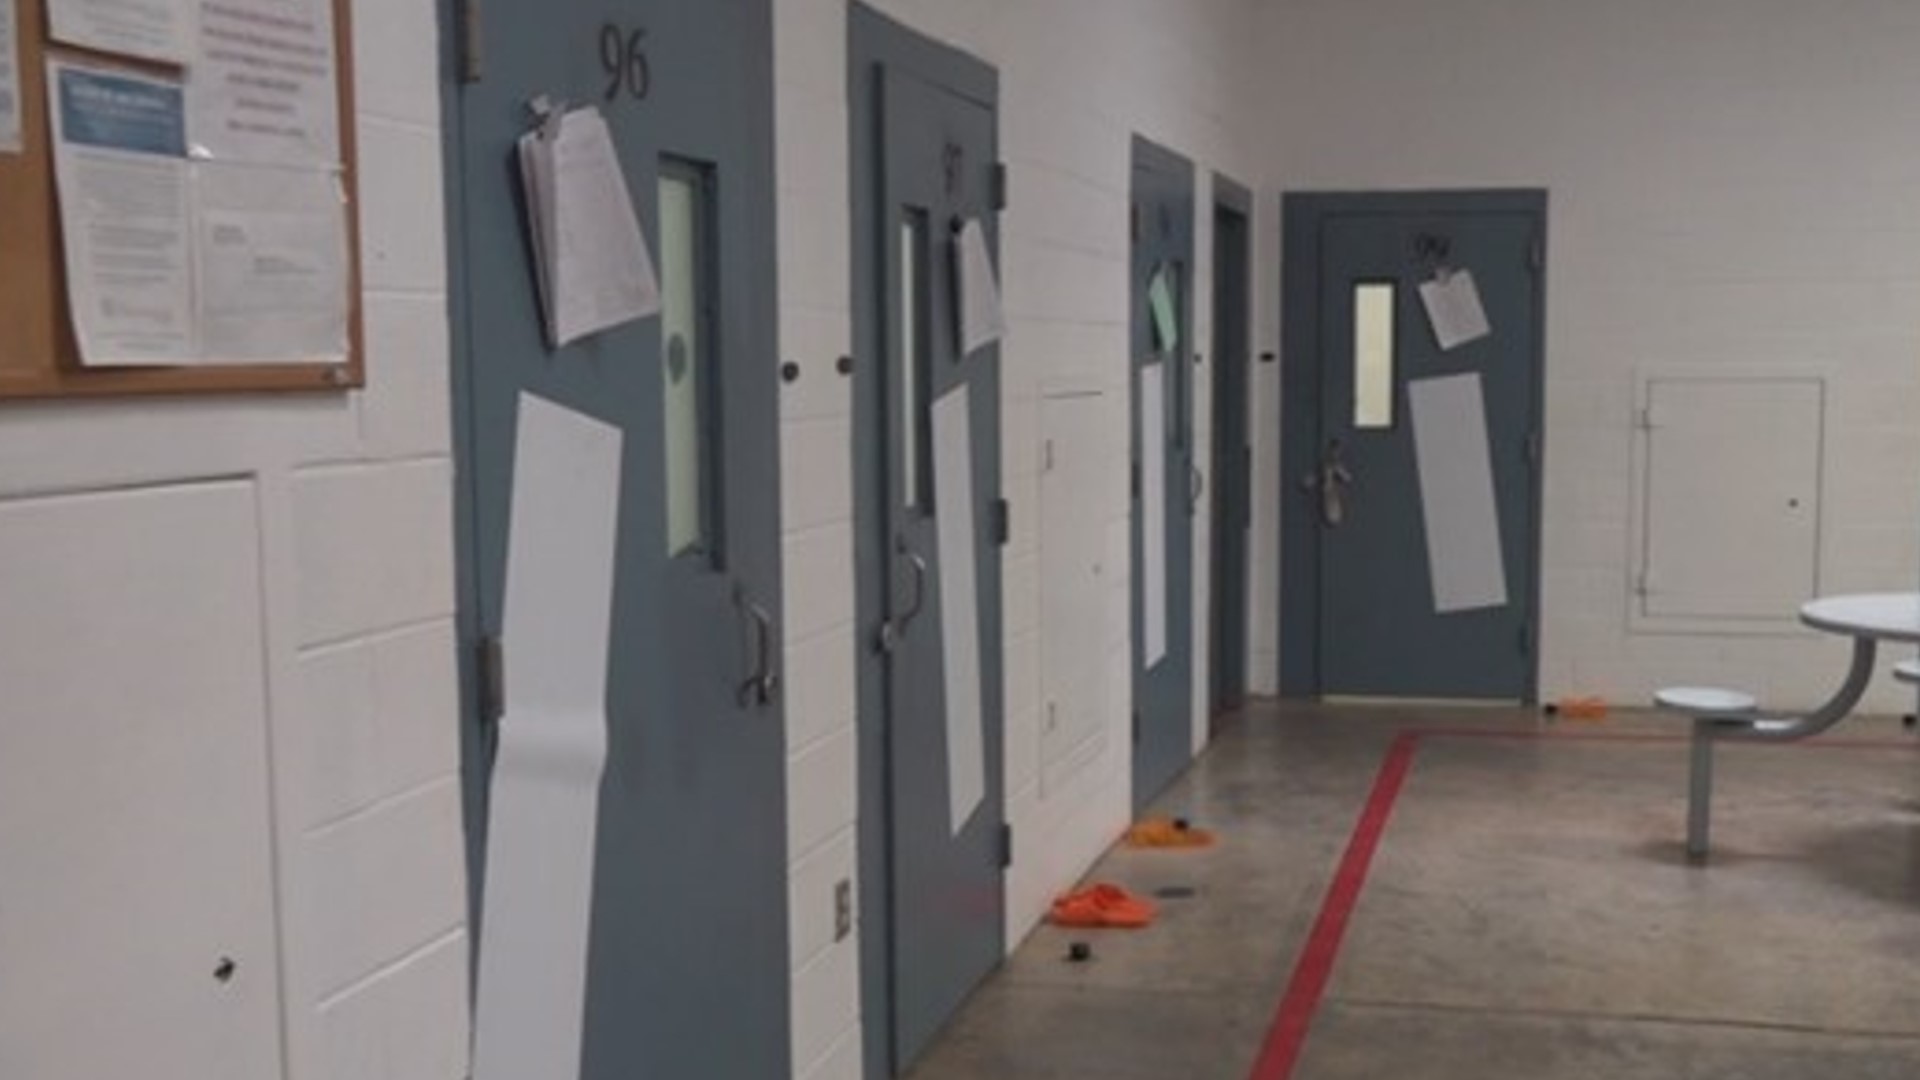 A Look Into The Texas Juvenile Detention Process